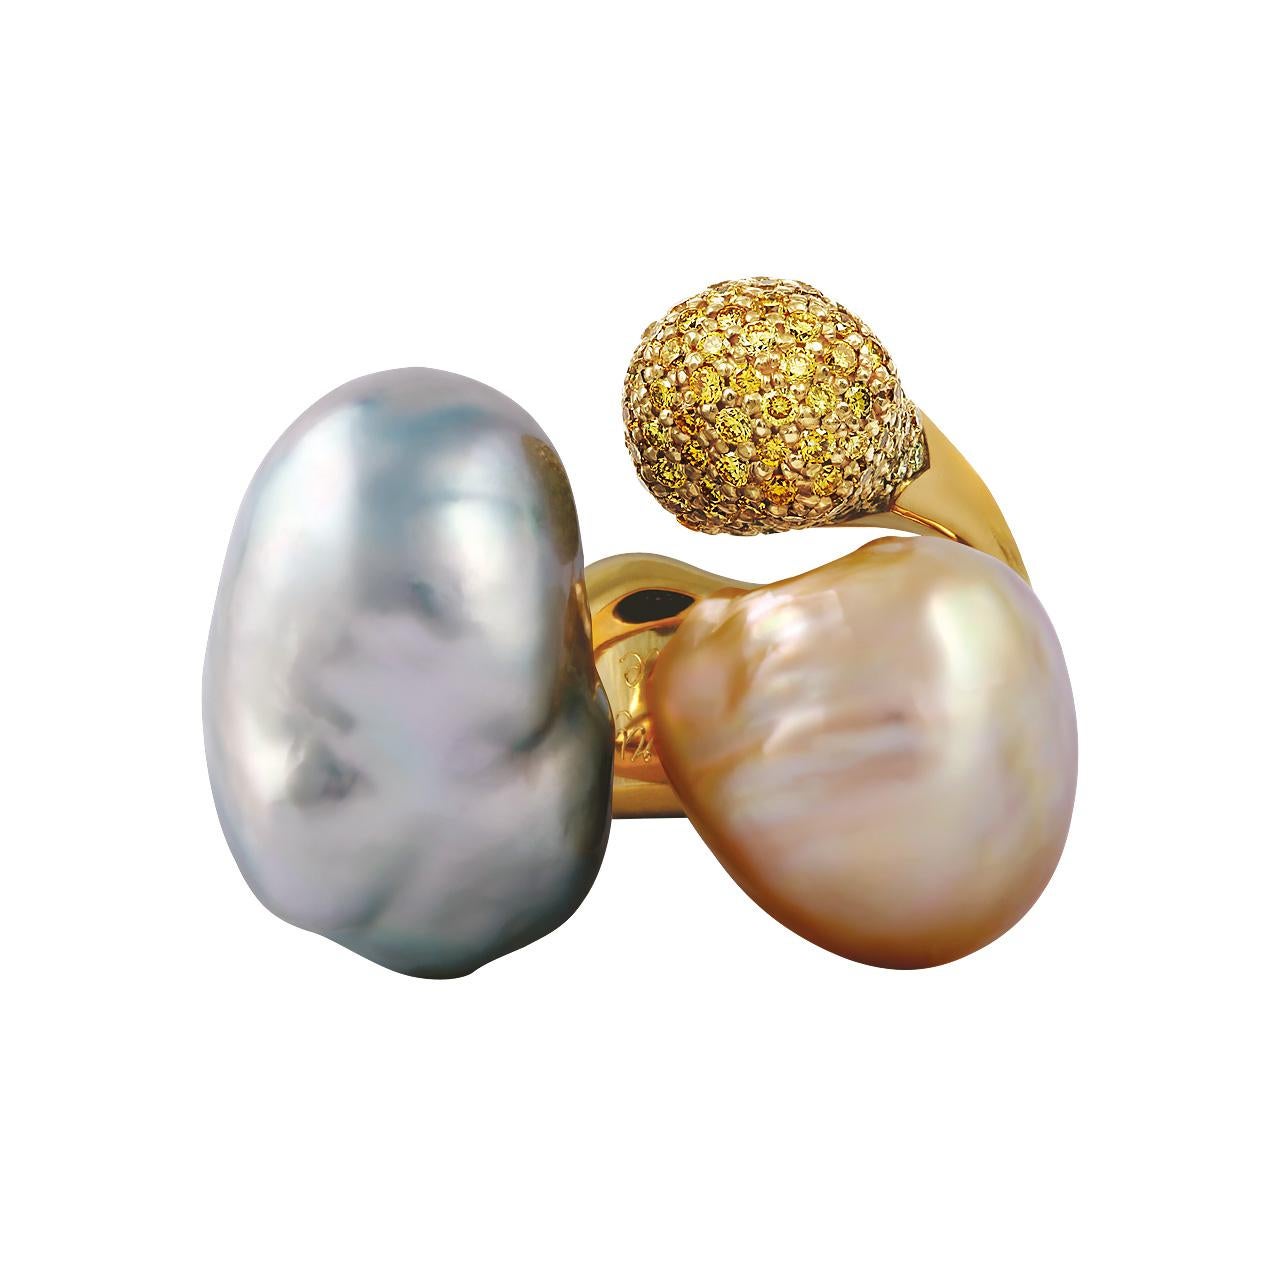 -218 Round Yellow Diamonds –1.494 ct, Z/SI3
- 27 Round Diamonds – 0.106 ct, G/VS1
- 18.3 mm White South Sea Baroque pearl
- 15.9 mm Pink South Sea Baroque pearl
- 18K Yellow Gold 
- Weight: 25.54 g
- Size: 17.5 mm
This spectacular ring from the